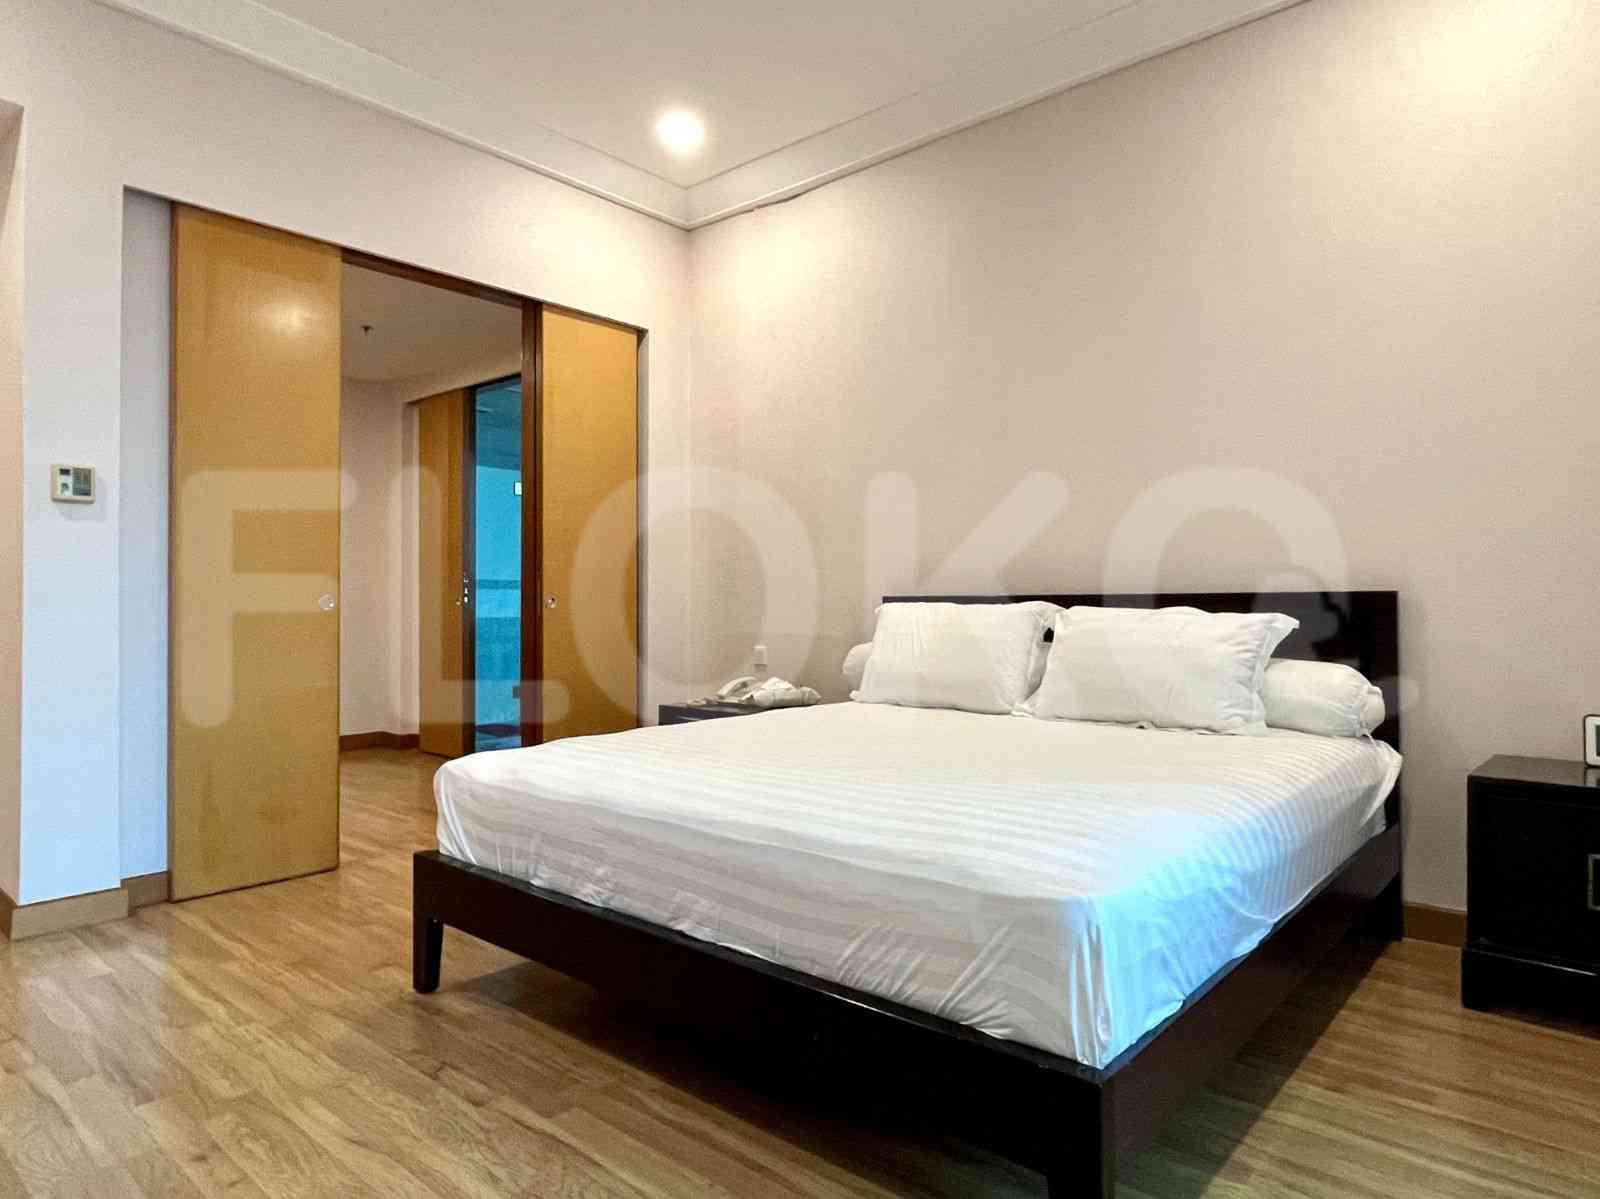 3 Bedroom on 15th Floor for Rent in Pakubuwono Residence - fgaa5e 3